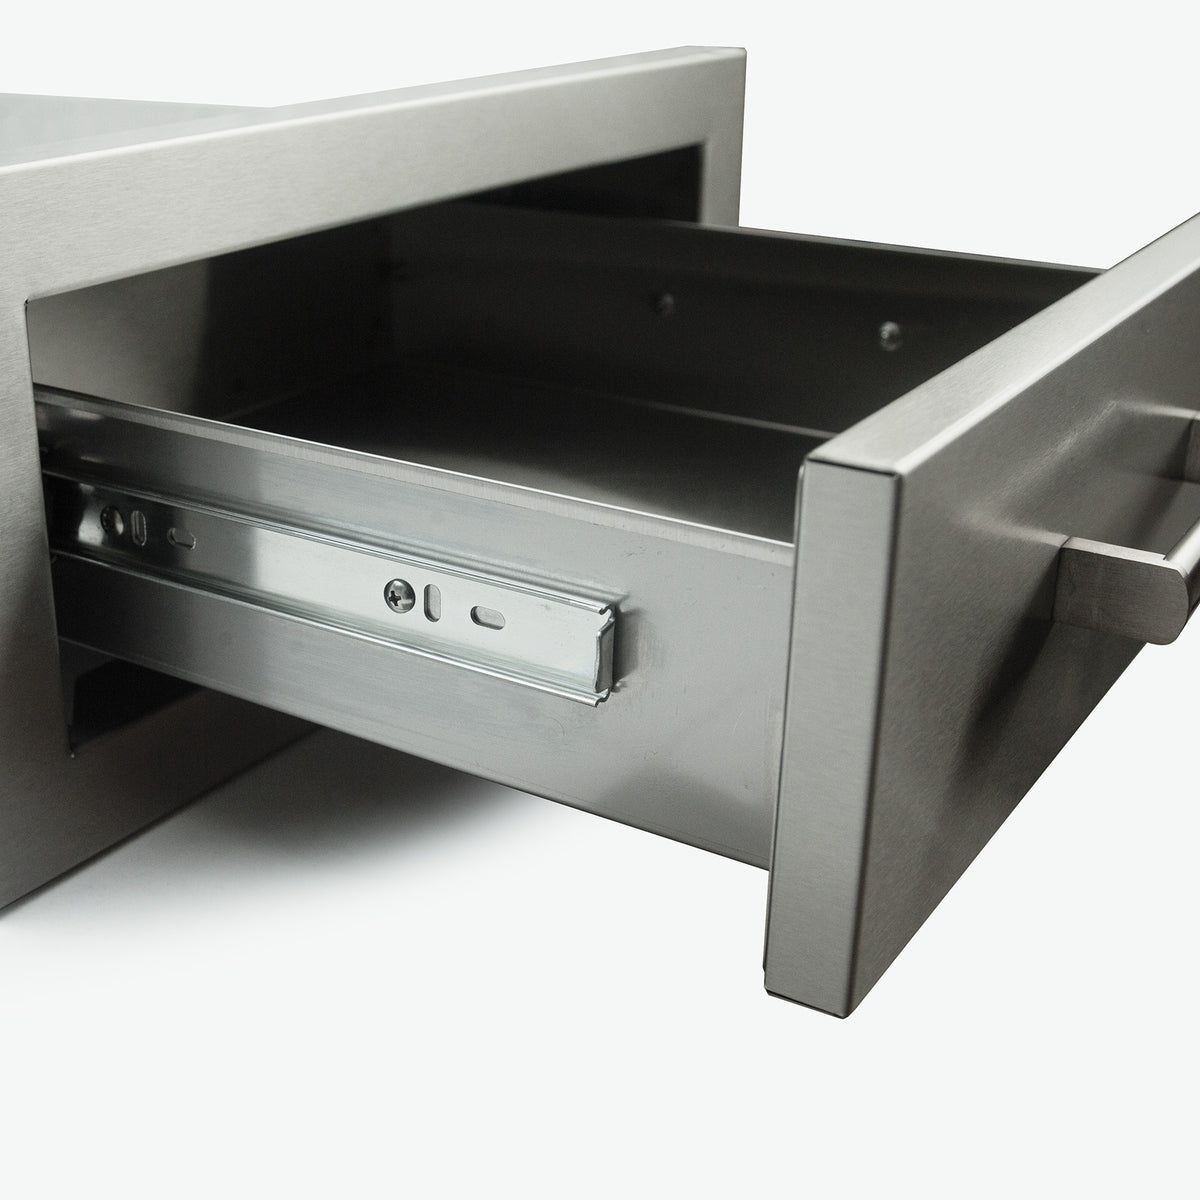 Draco Grills Stainless Steel Build-in Outdoor Kitchen Single Width Drawer